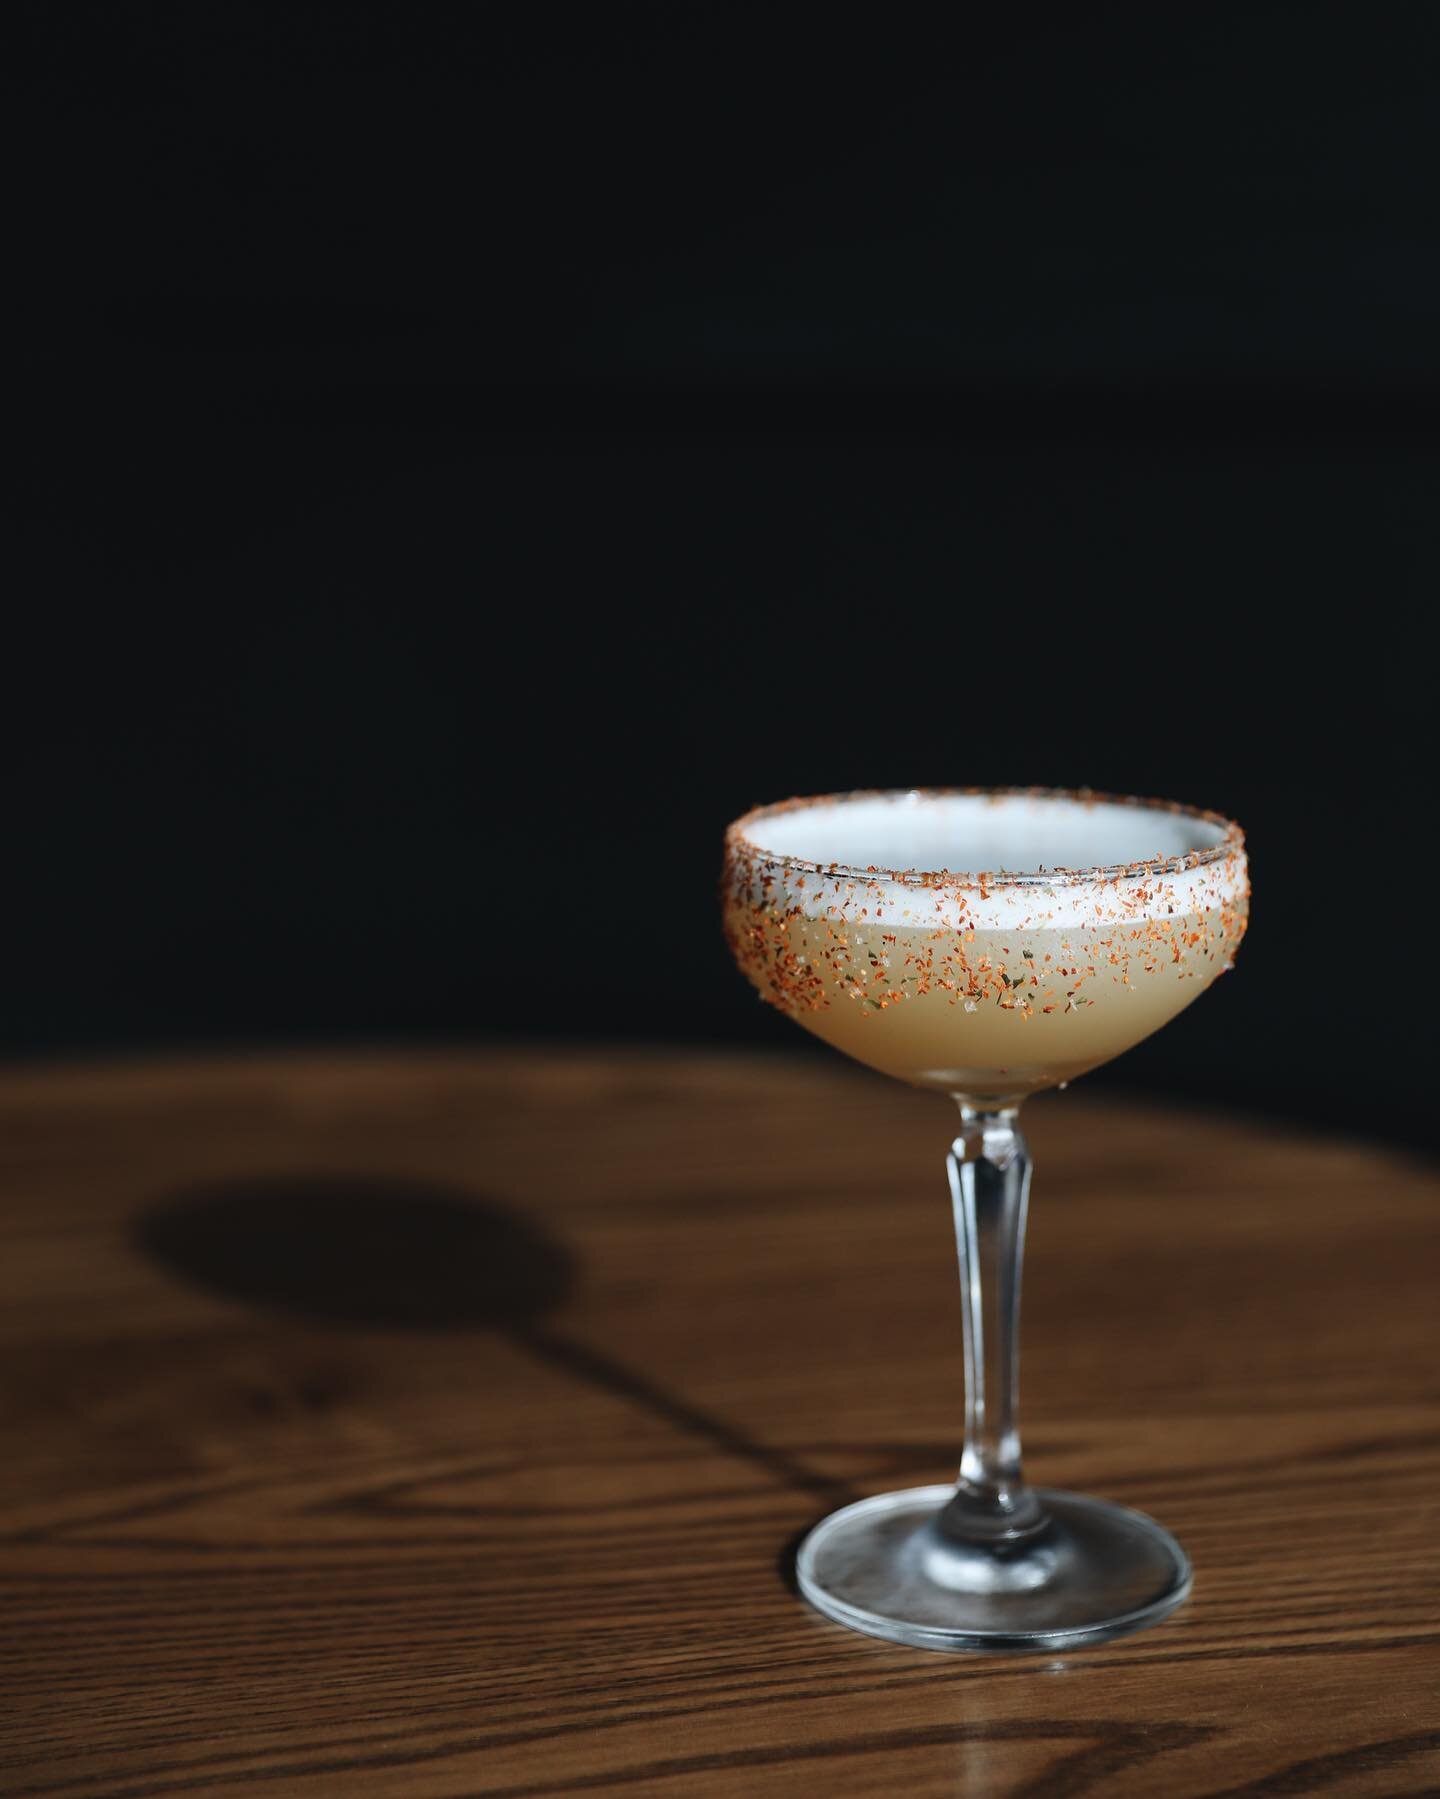 If you didn&rsquo;t already have a good reason to stop by PONI this weekend then this might help &hellip; 

We&rsquo;ve got 3 new cocktails on the menu and they are YUM!!

Chottomatte | chilli tequila, grapefruit, plum wine, shichimi [you can ask the